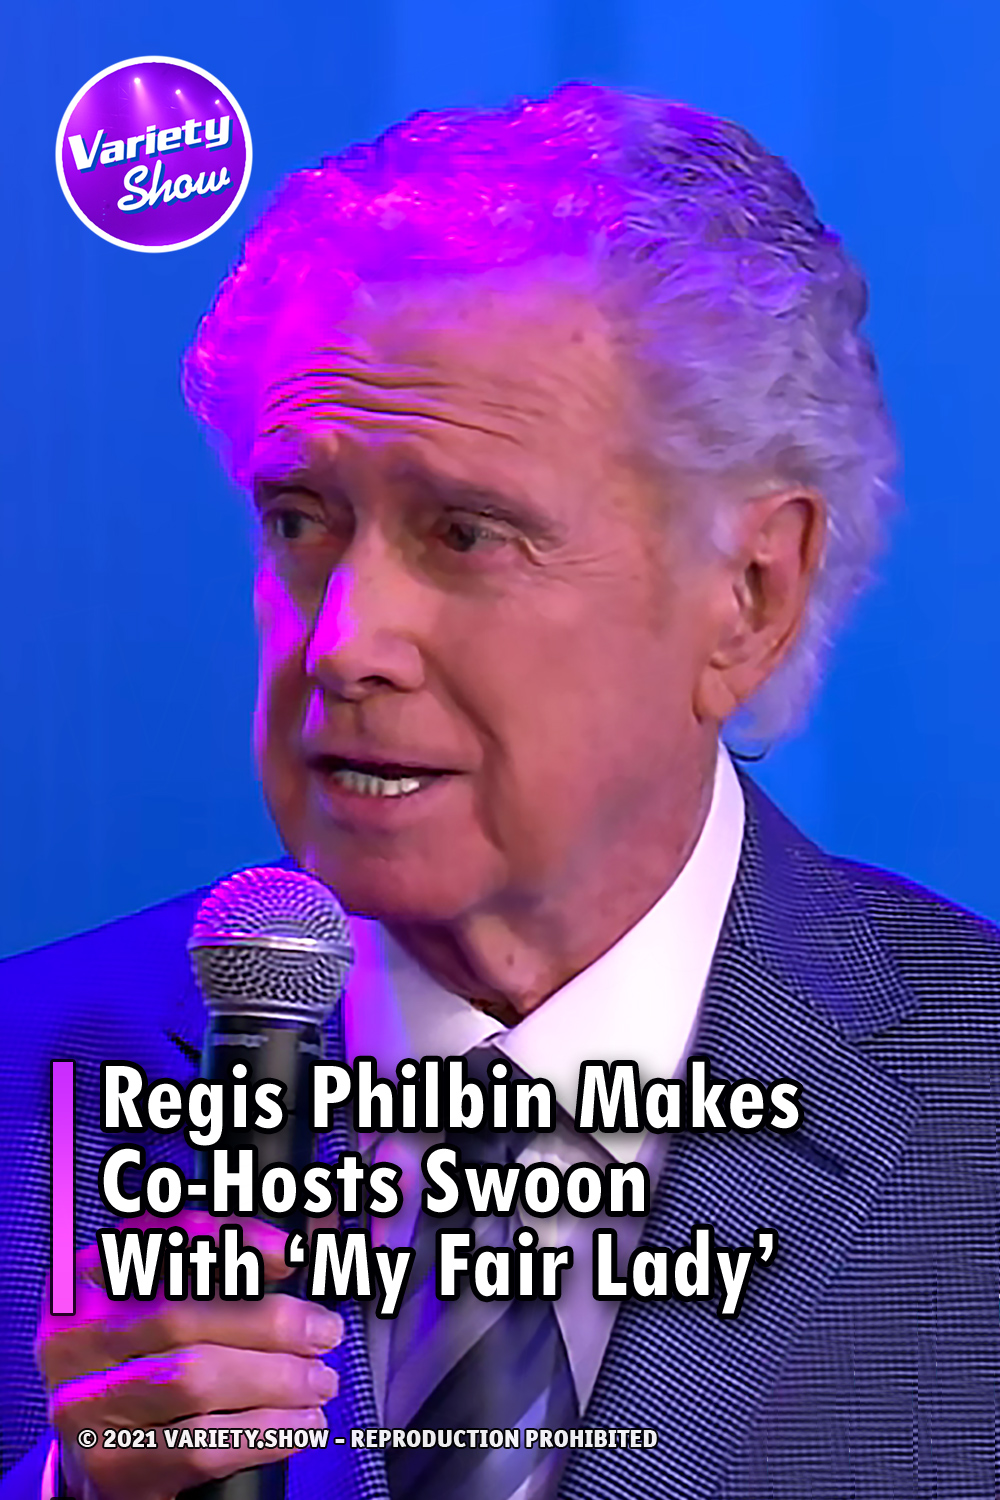 Regis Philbin Makes Co-Hosts Swoon With ‘My Fair Lady’